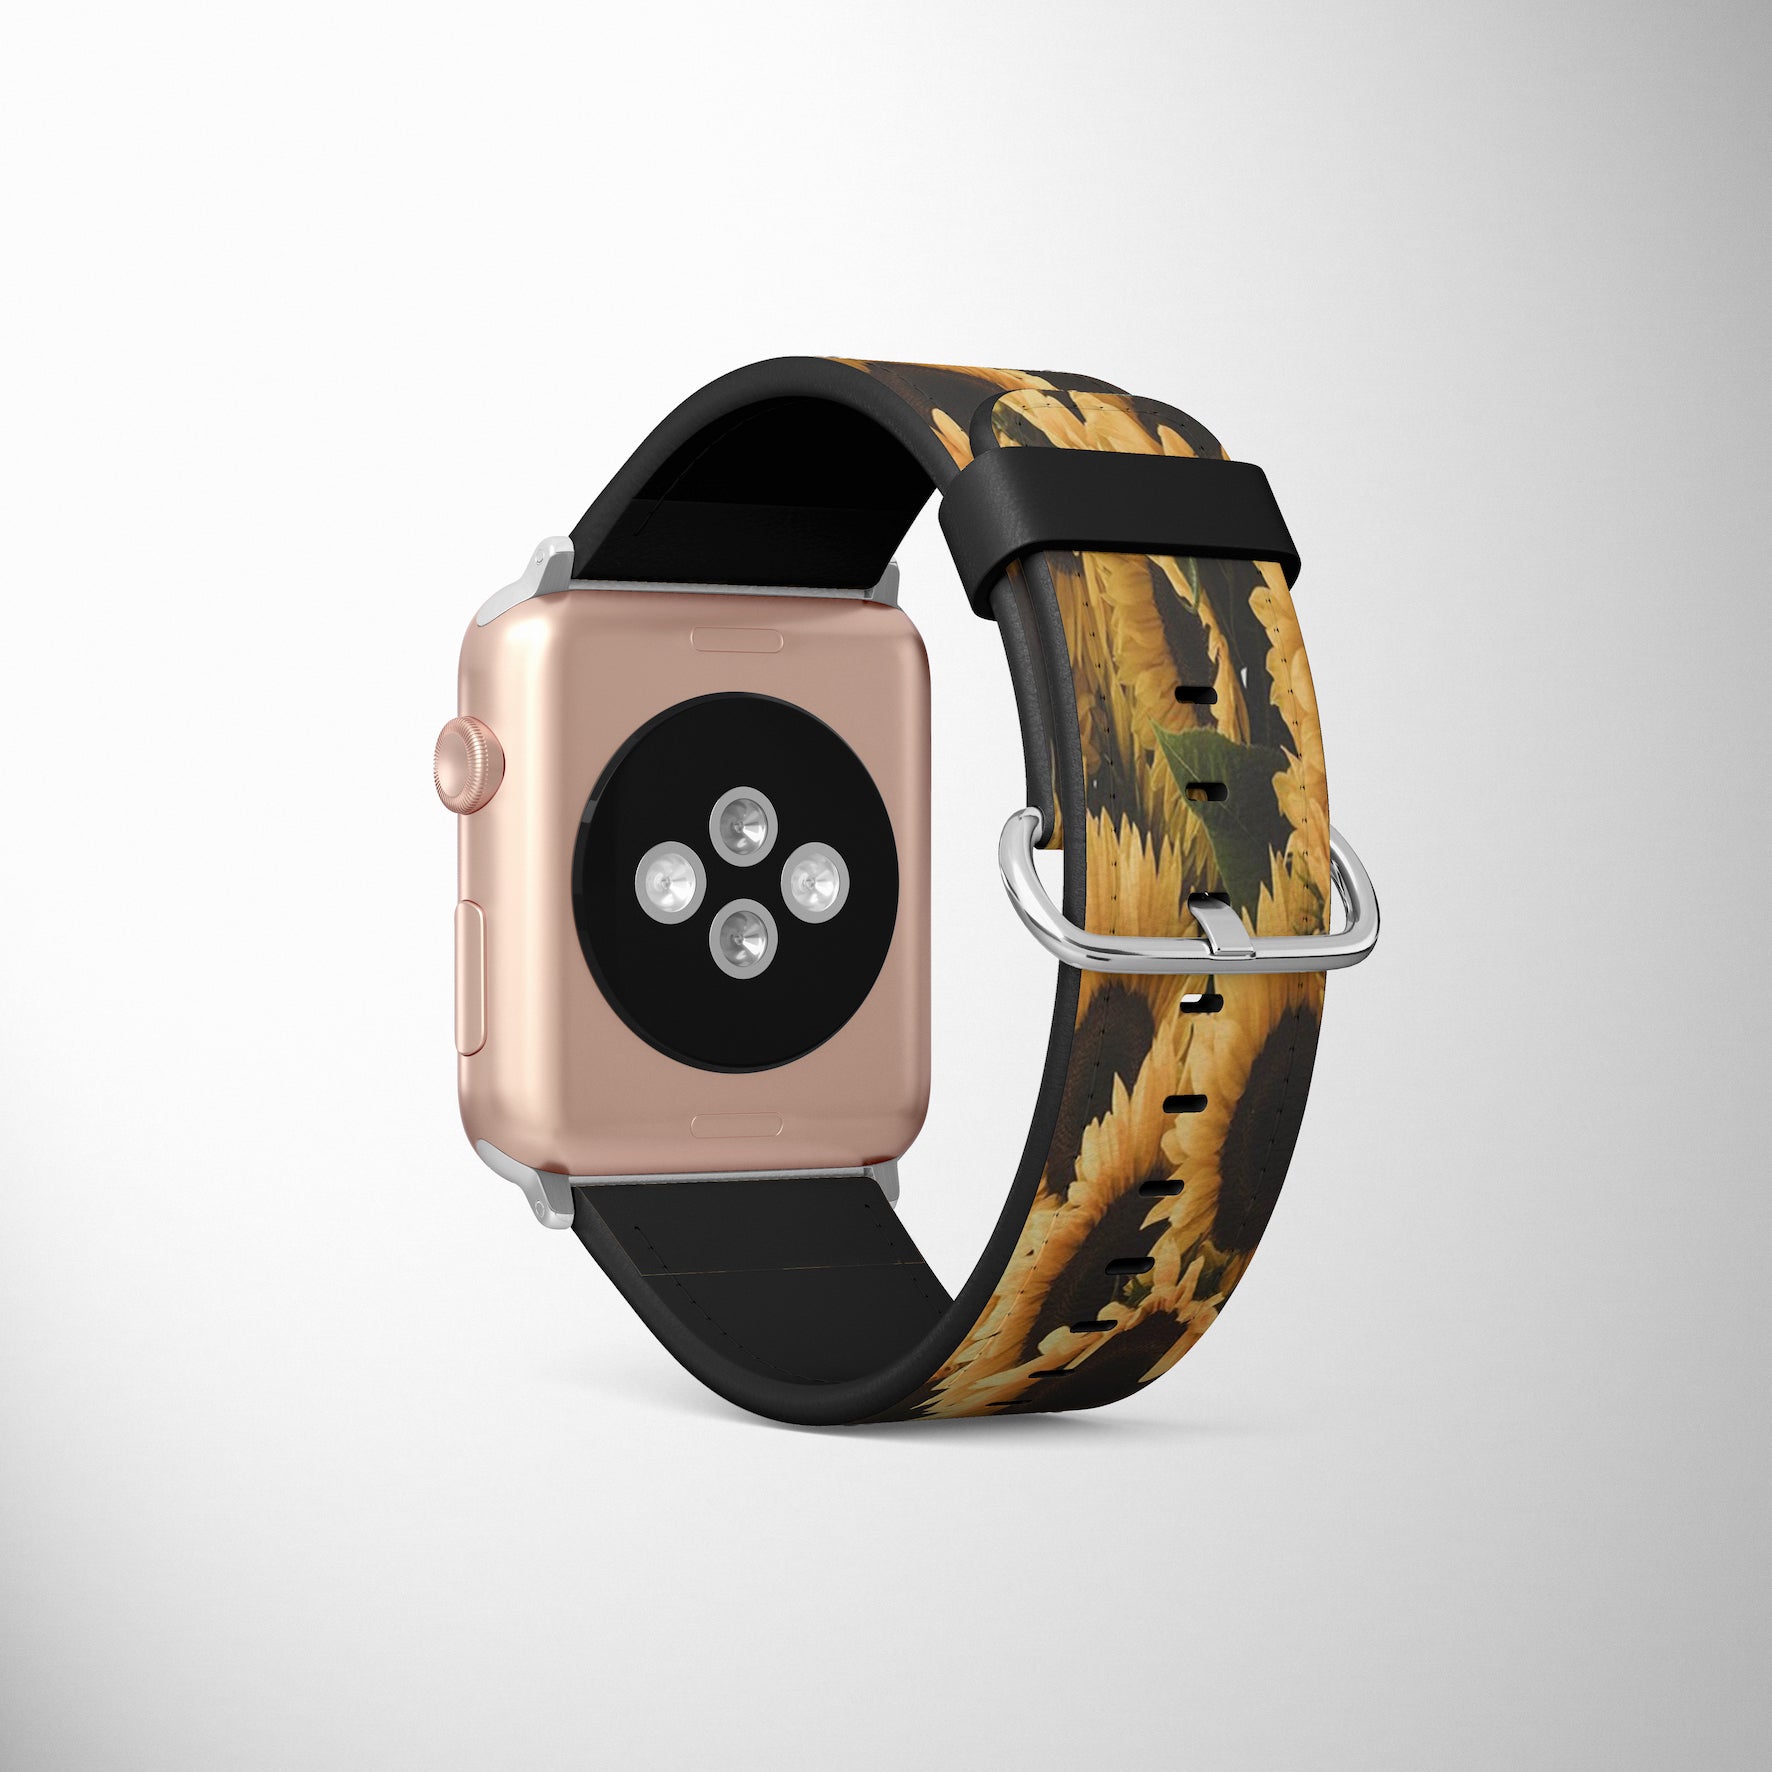 Sunflower Faux Leather Apple Watch Band for Apple Watch 1,2,3,4,5,6,SE - www.scottsy.com